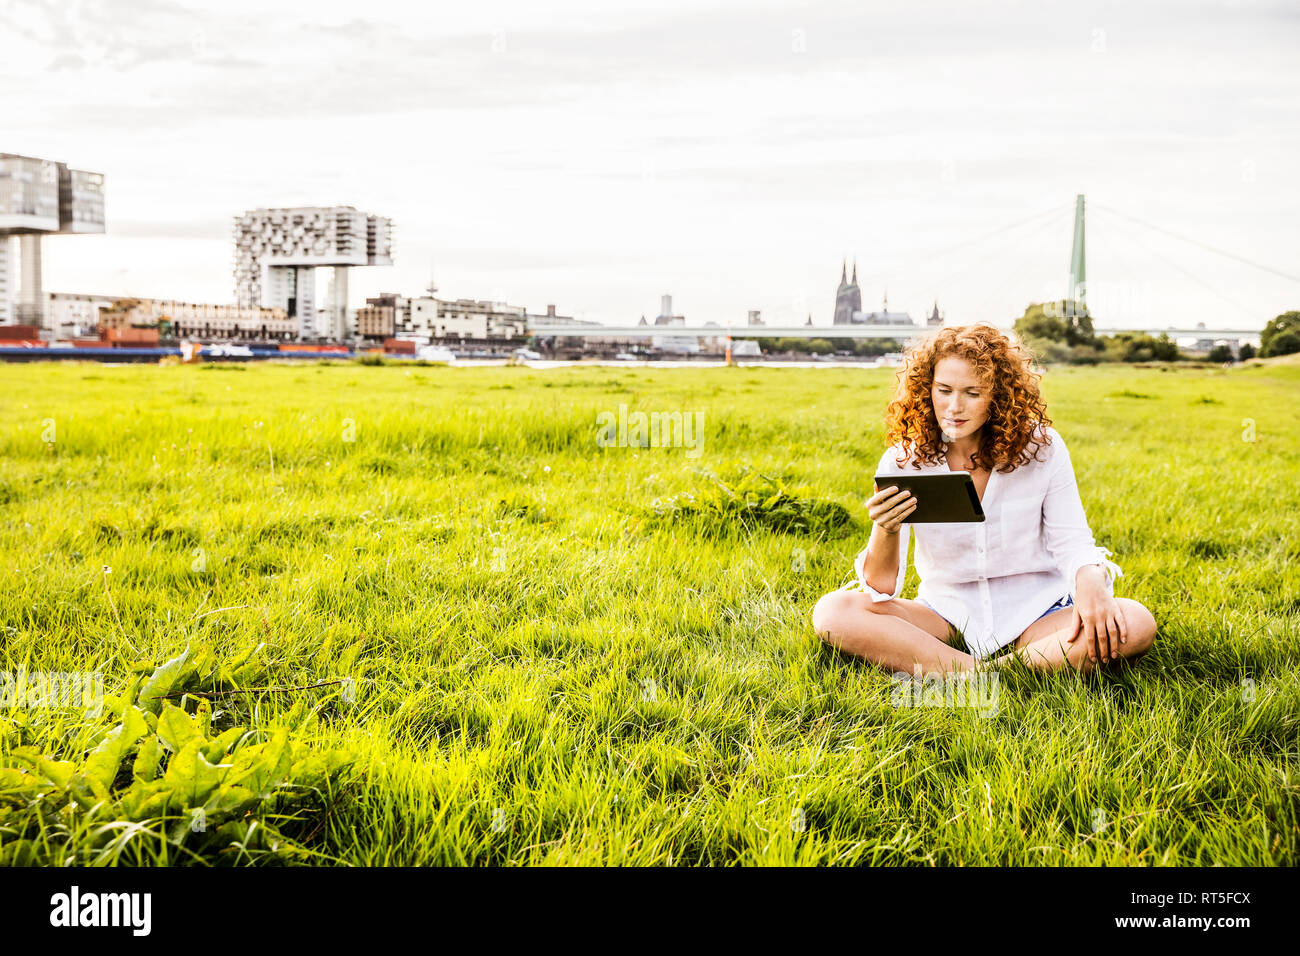 Germany, Cologne, young woman sitting on meadow looking at tablet Banque D'Images